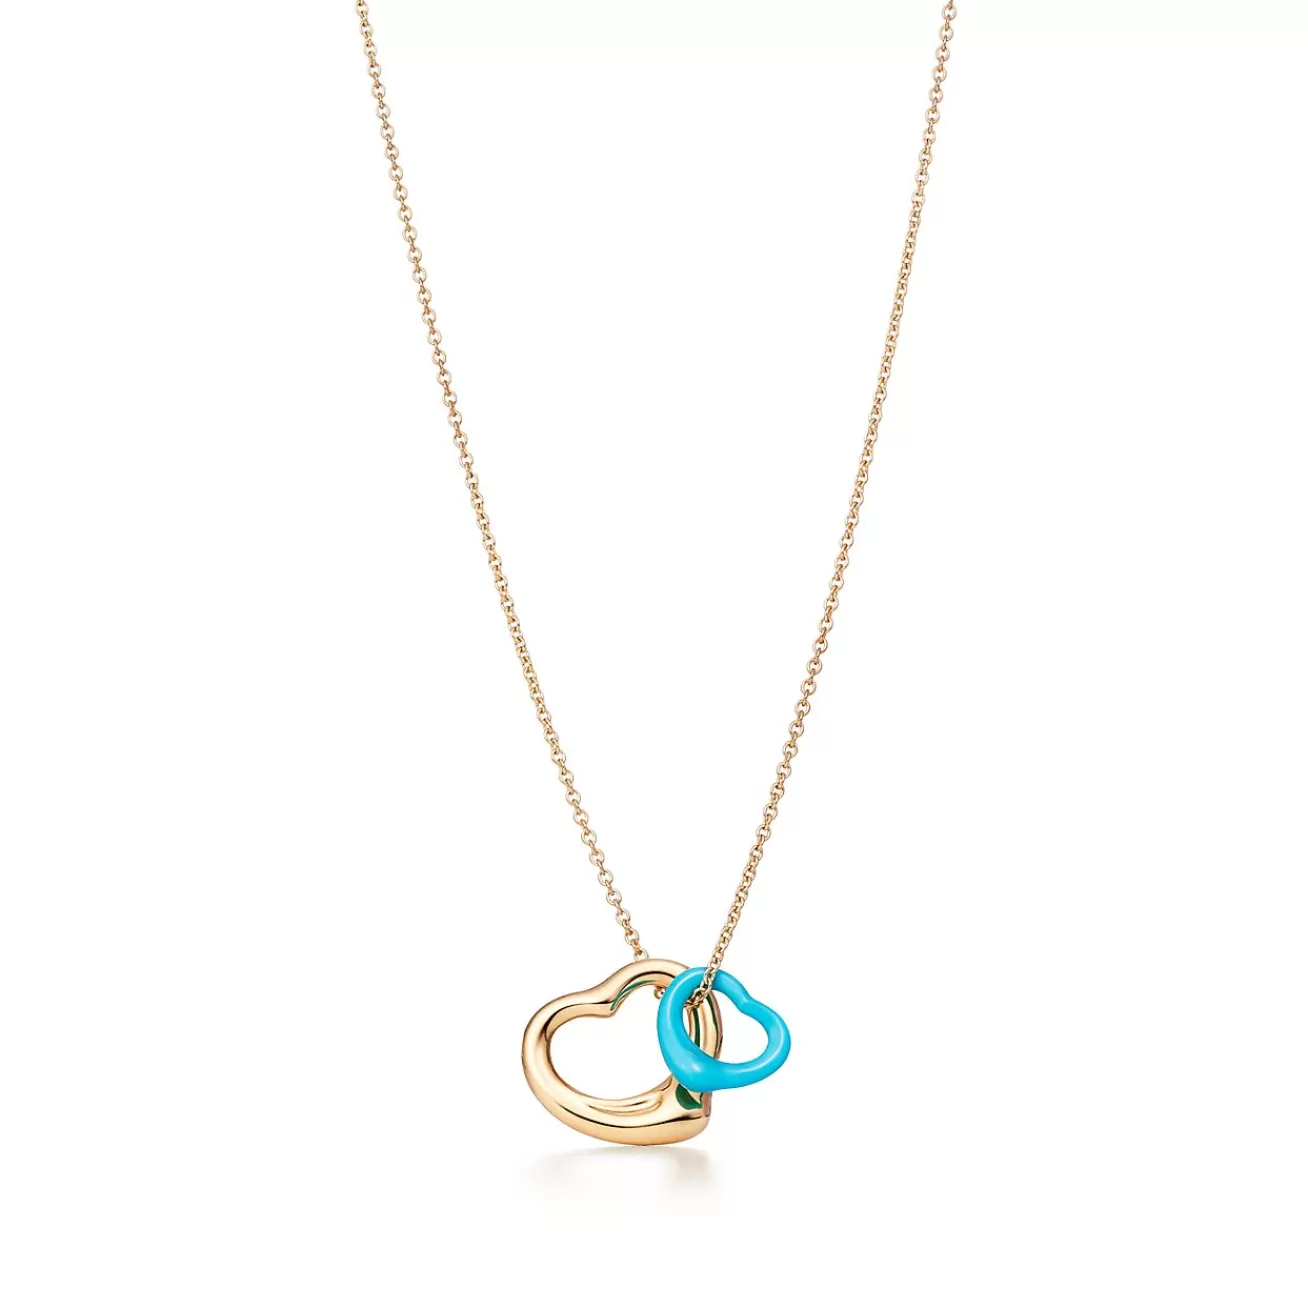 Tiffany & Co. Elsa Peretti® Open Heart pendant in 18k gold and turquoise. | ^ Necklaces & Pendants | Gold Jewelry